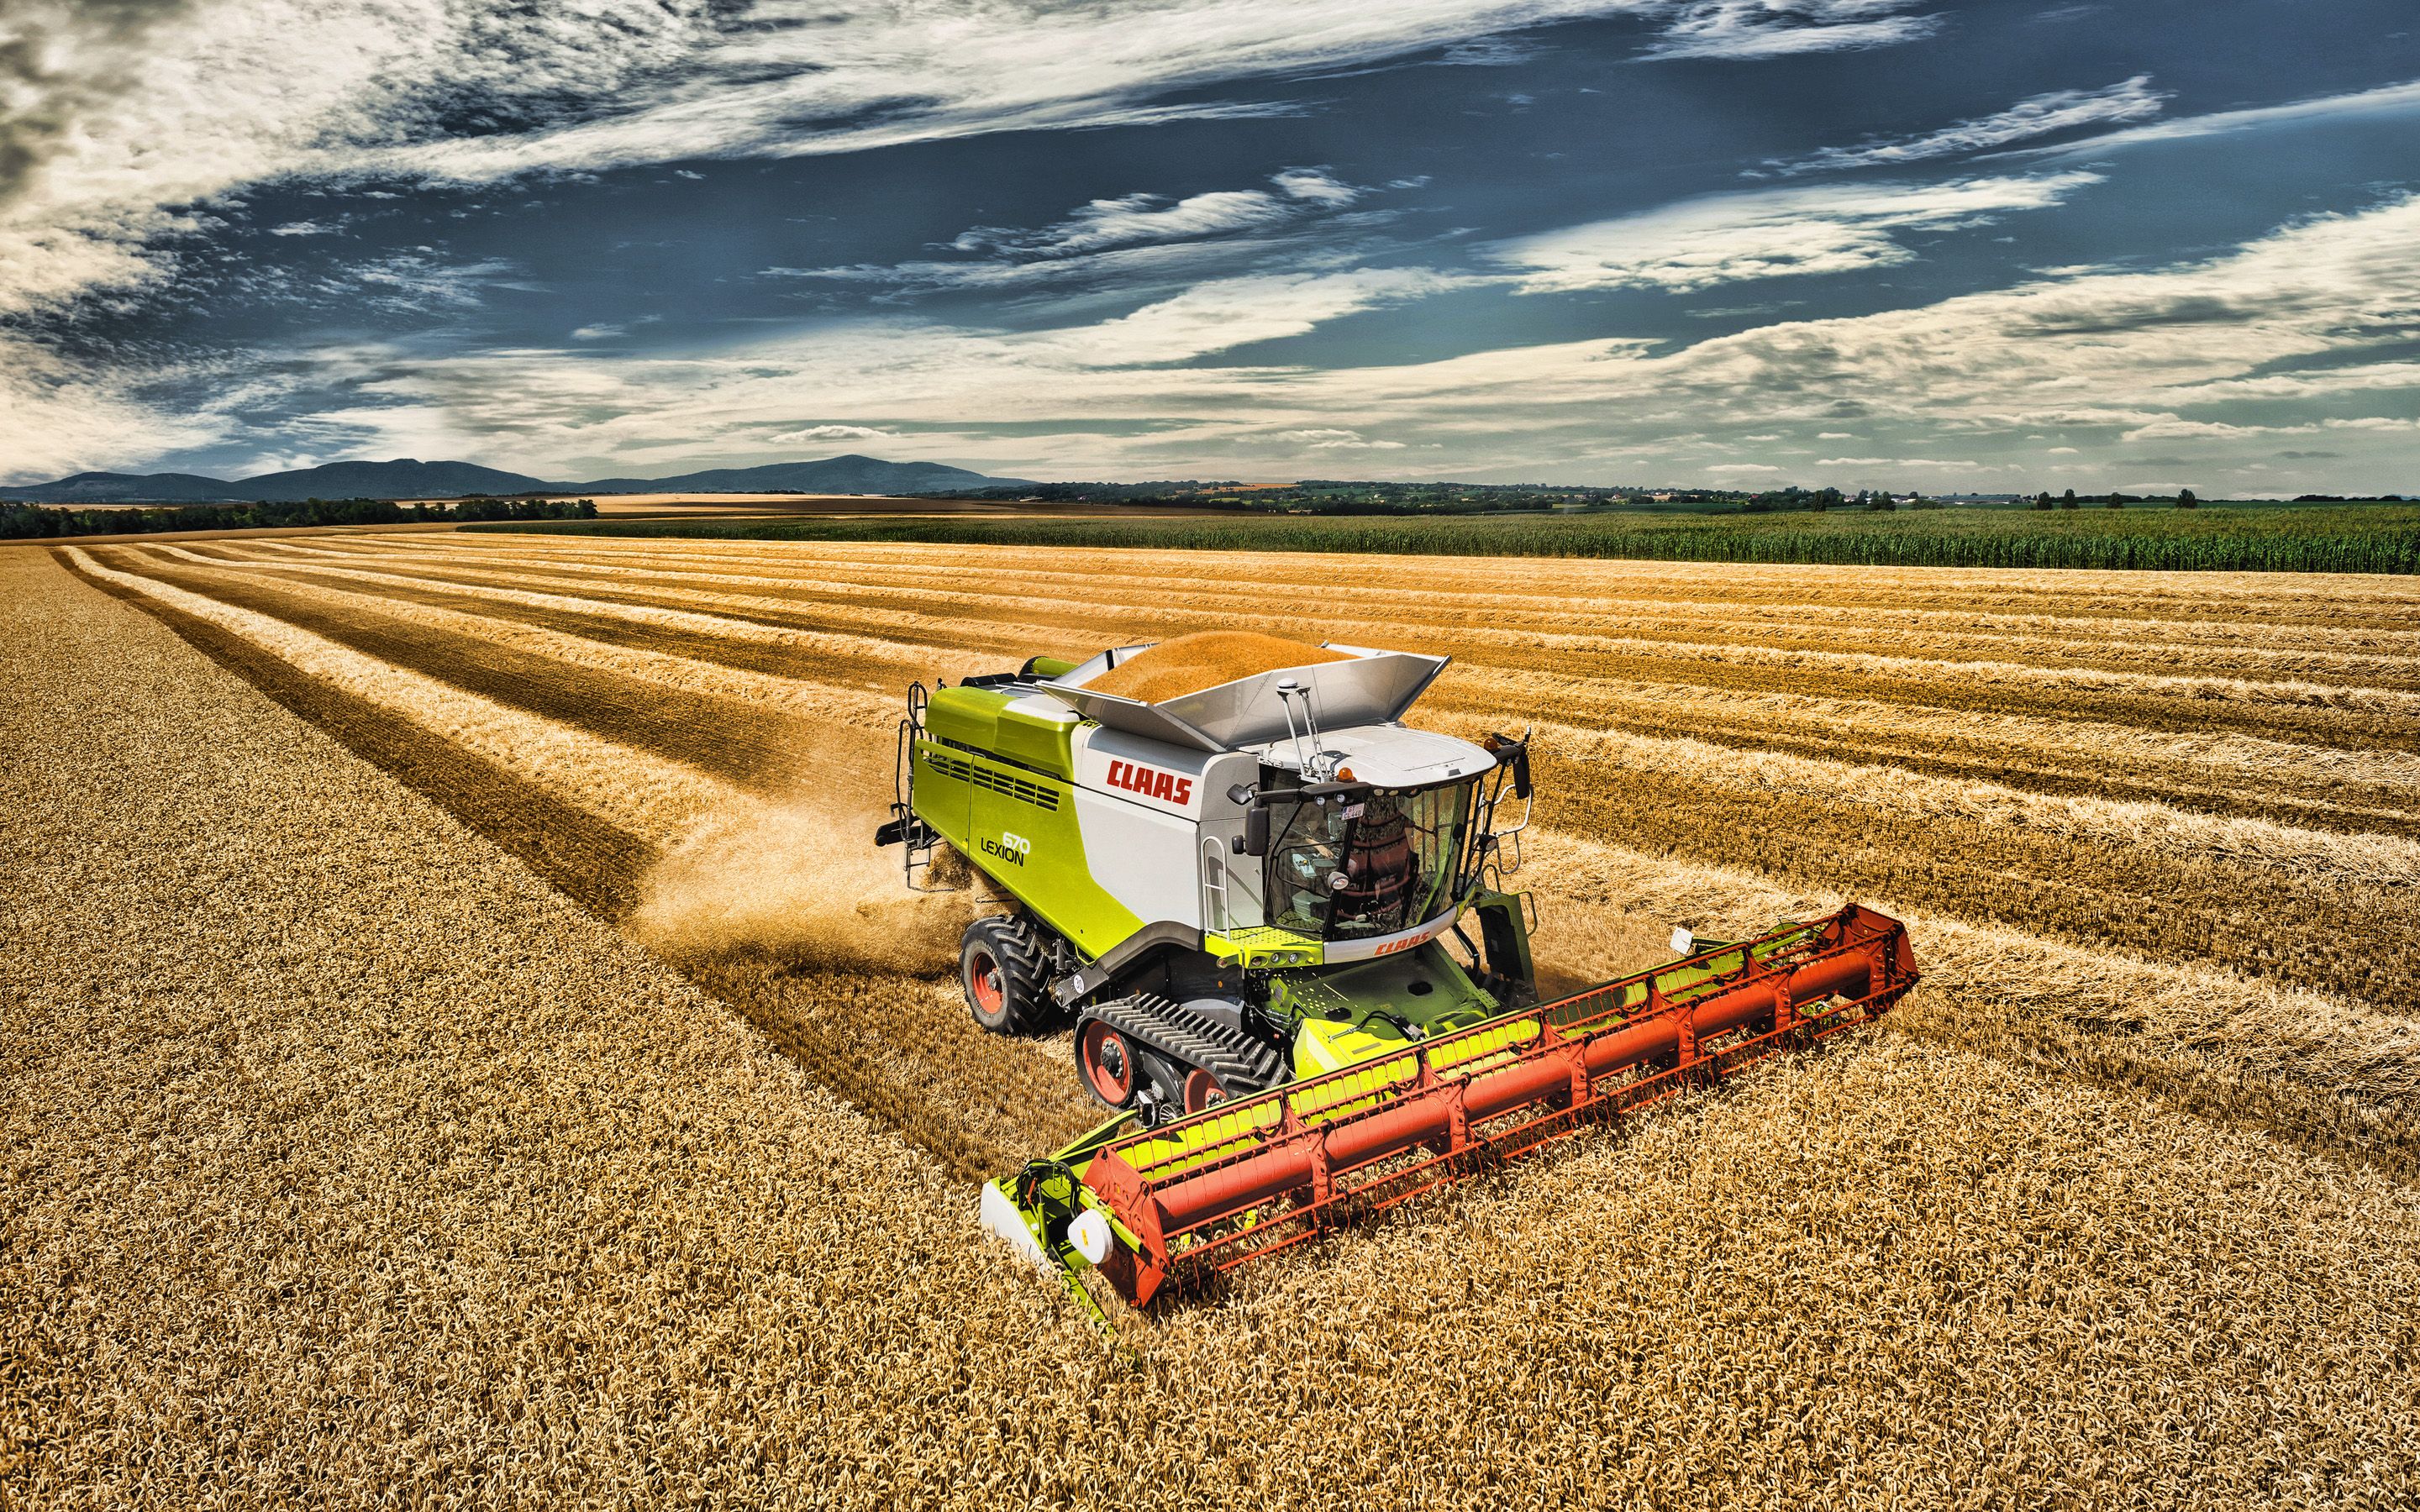 Download wallpaper CLAAS Lexion grain harvesting, HDR, 2019 combines, agricultural machinery, wheat harvest, combine harvester, Combine in the field, agriculture, CLAAS for desktop with resolution 2880x1800. High Quality HD picture wallpaper